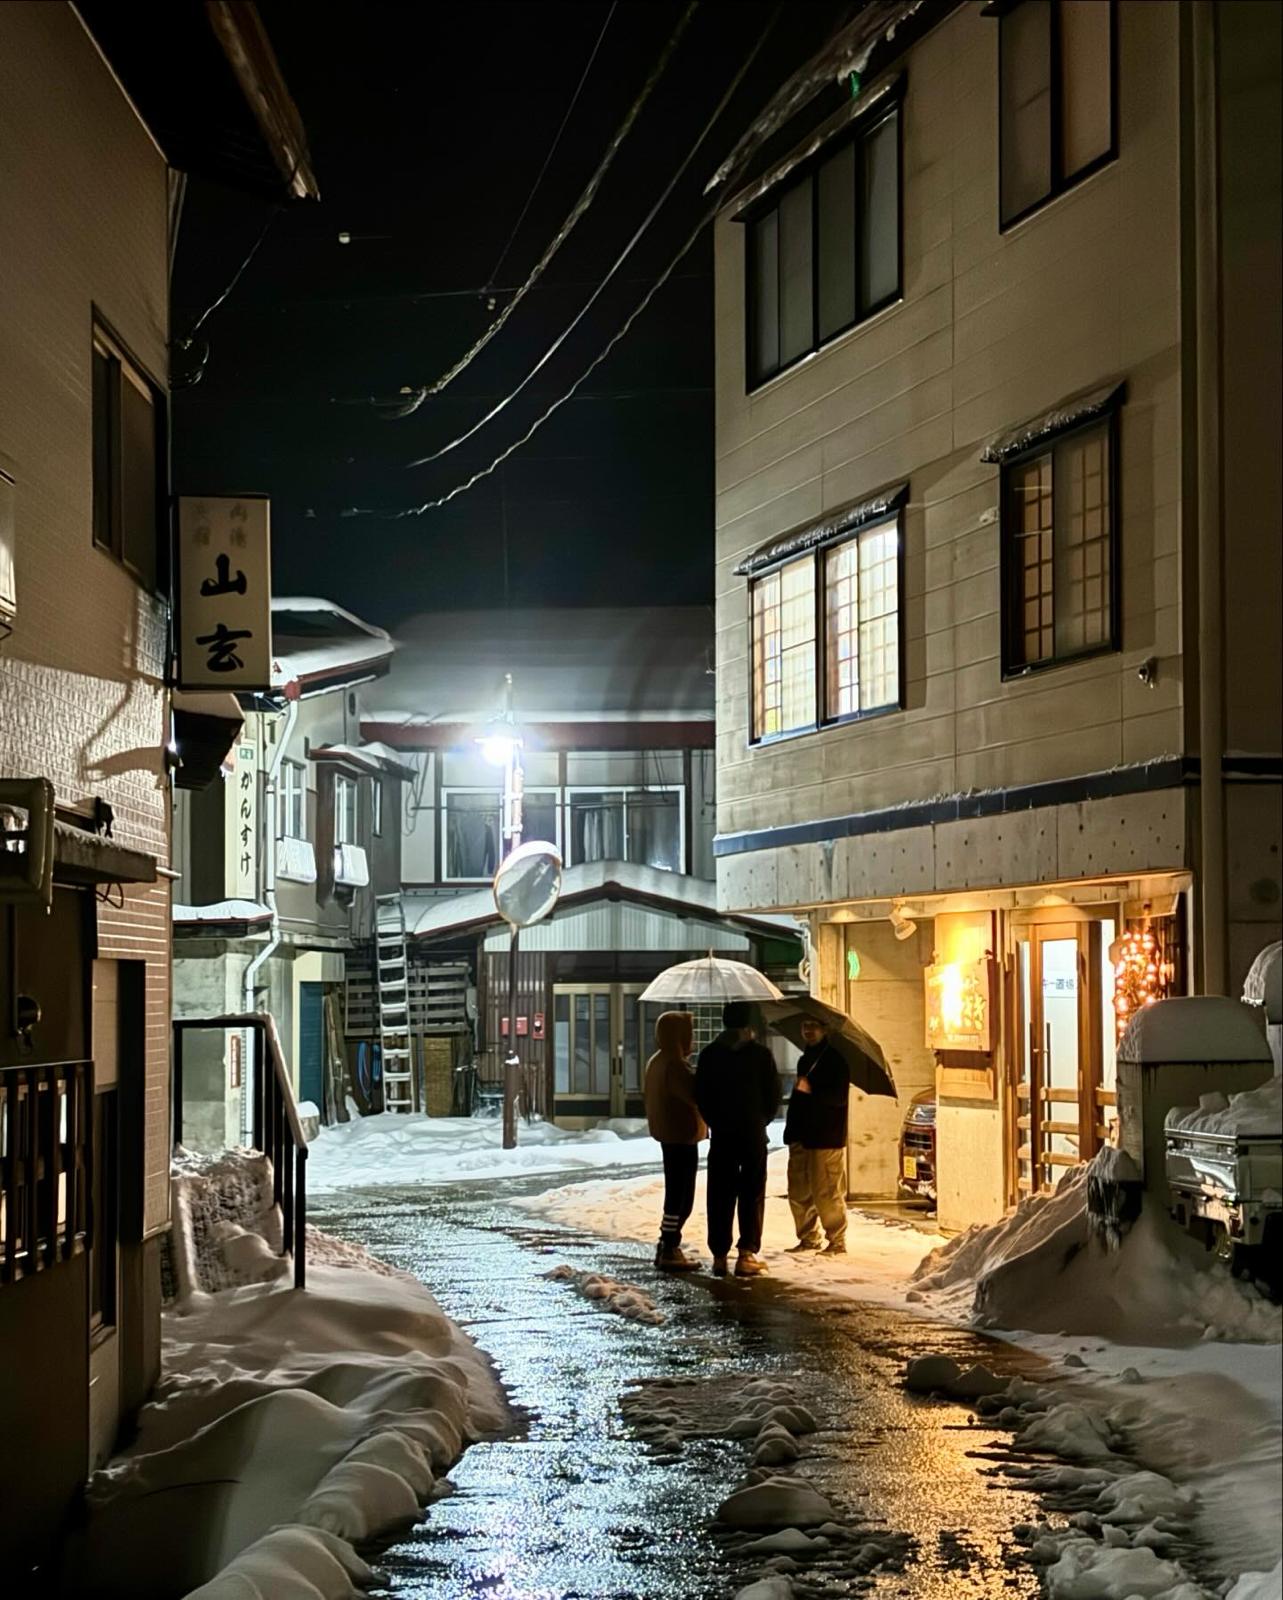 The Town of Nozawa Onsen remains busy in the evenings especially on the weekends